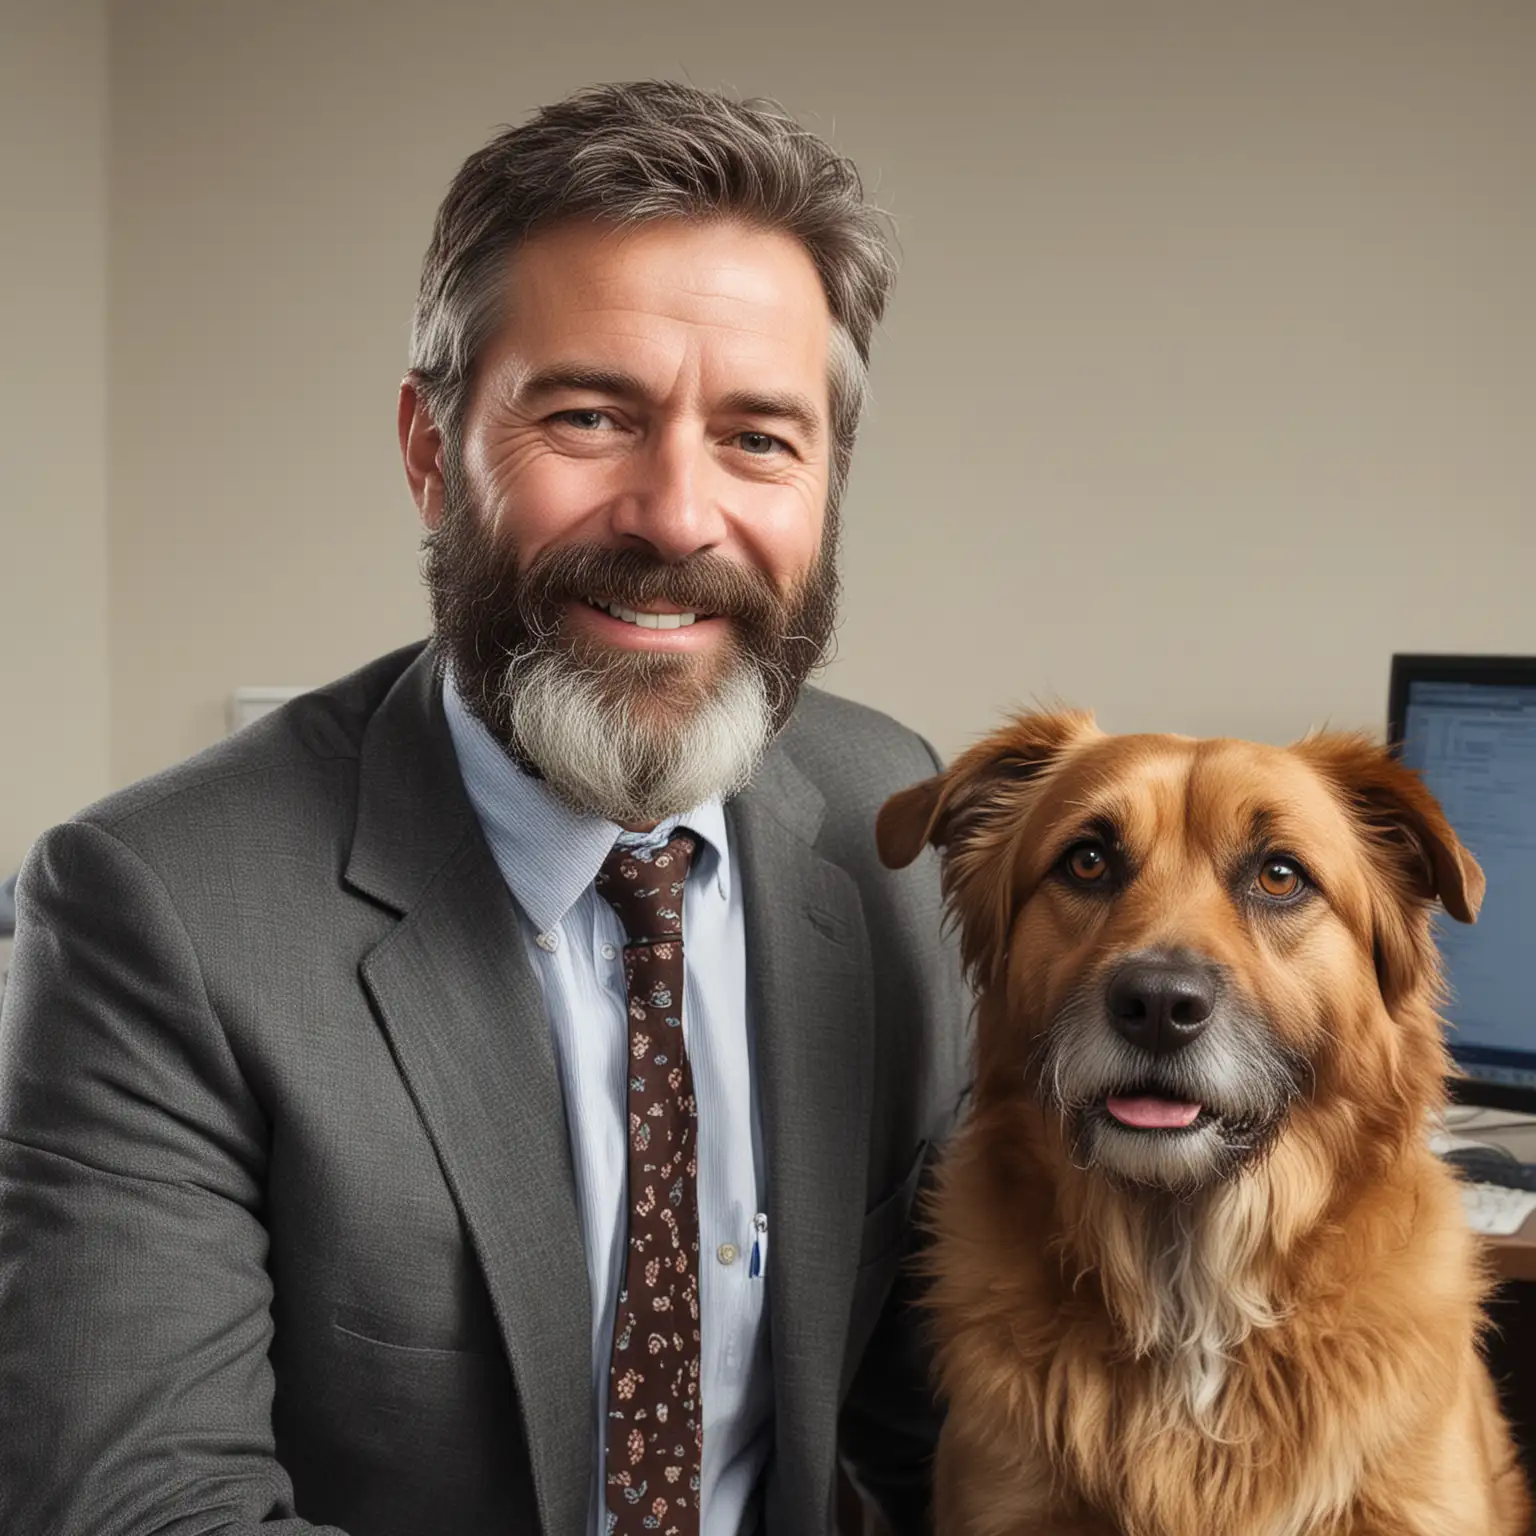 Friendly FiftySomething Man with Beard in Office Setting with Dog